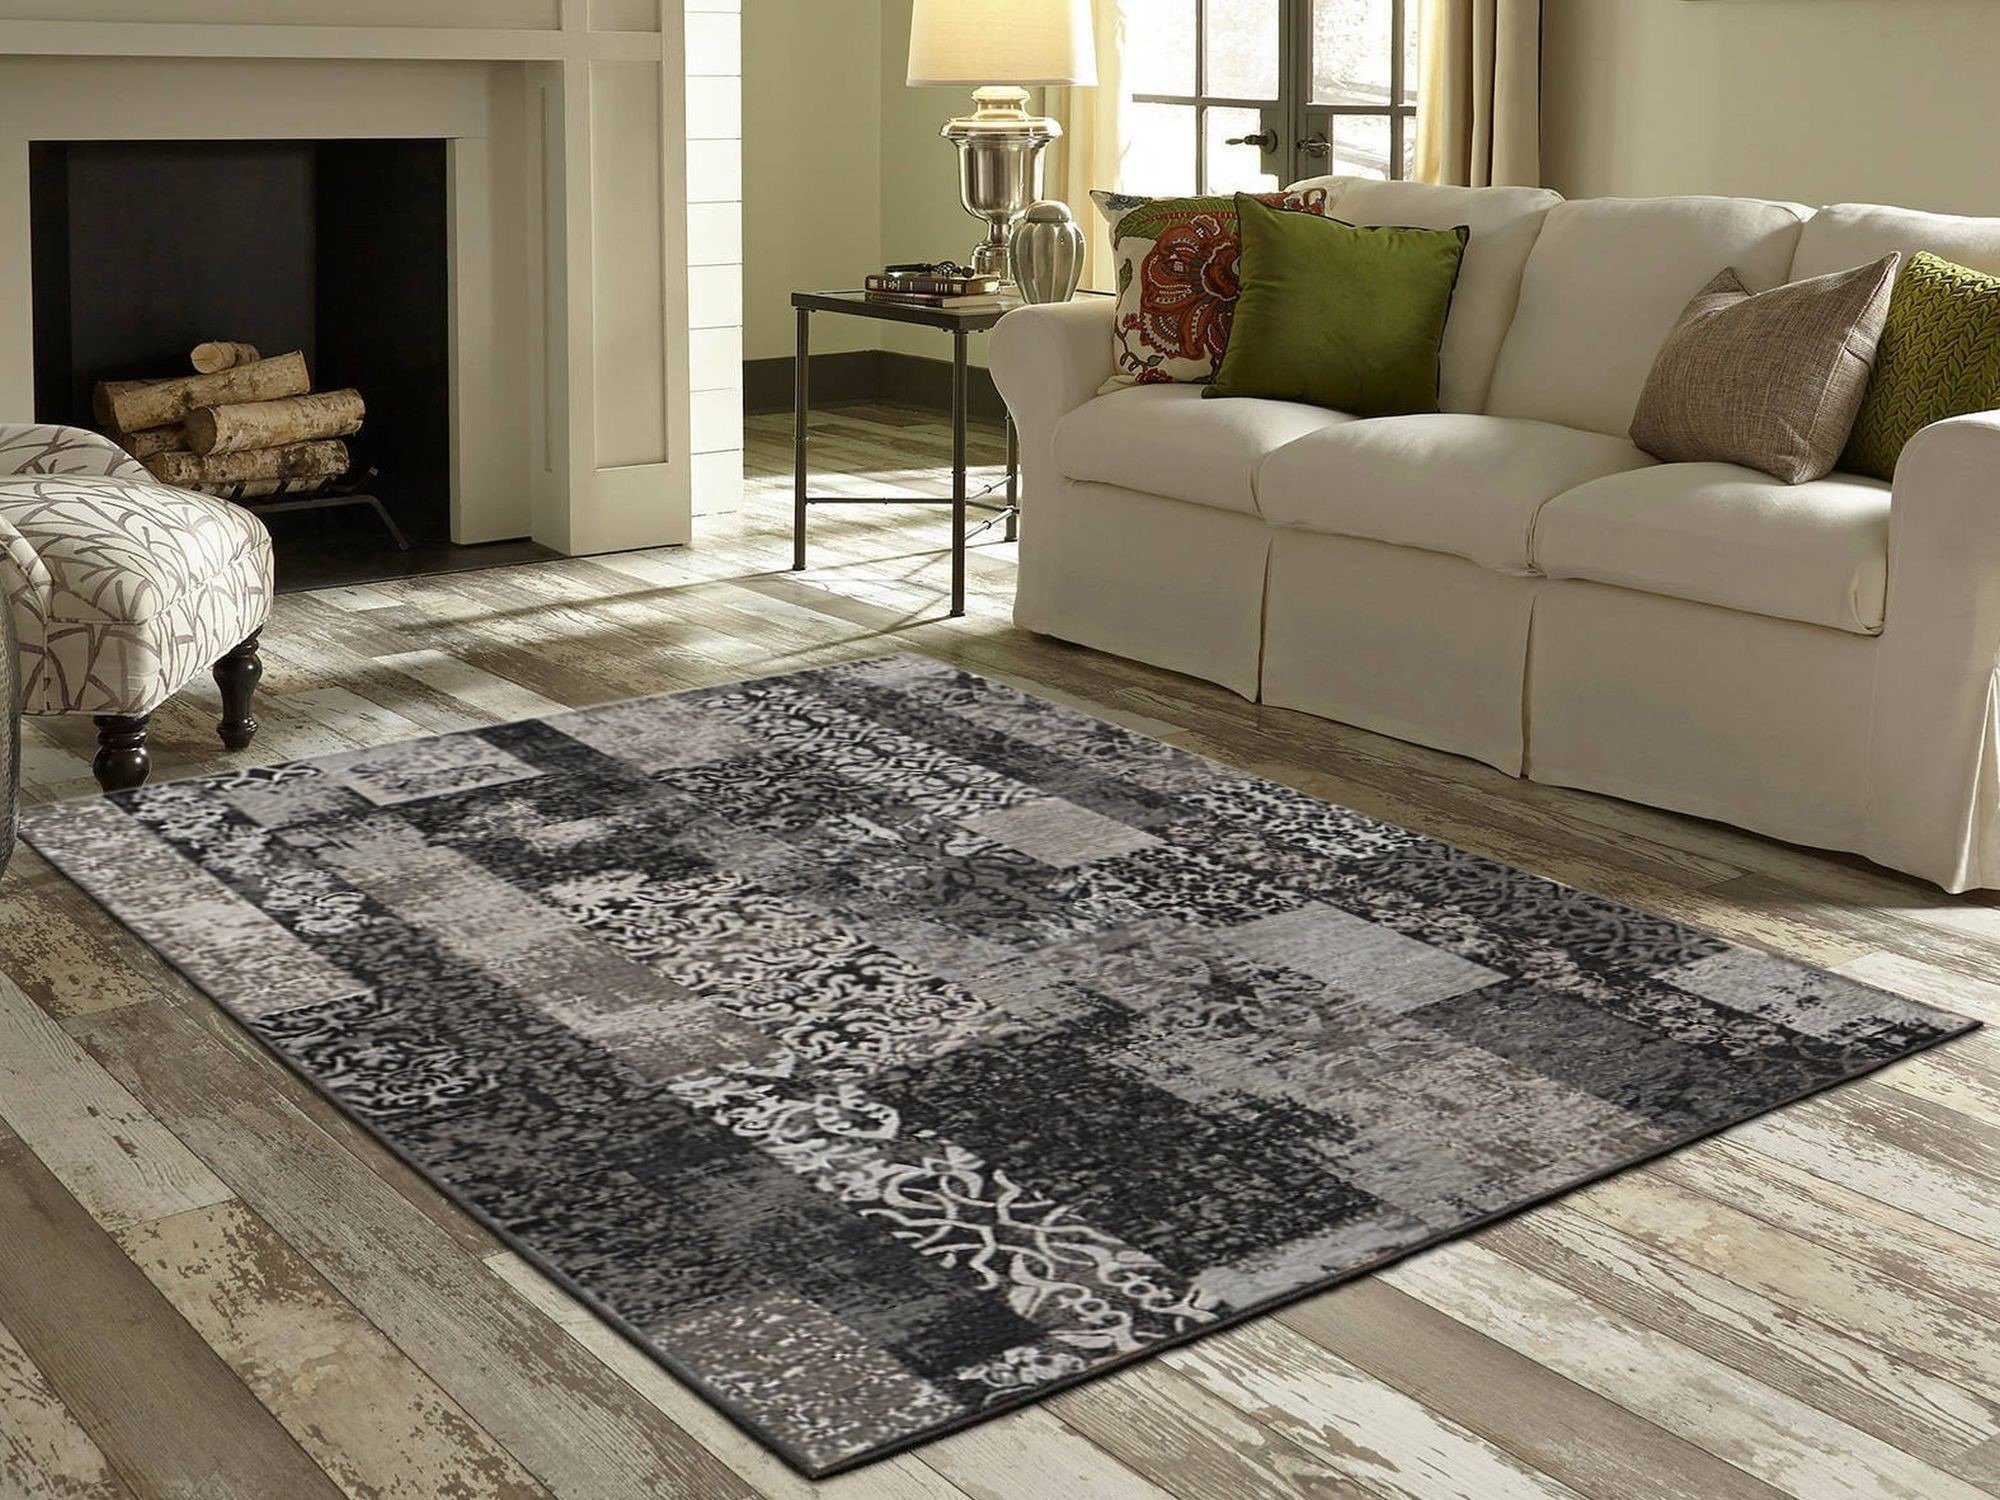 The Best Affordable Rugs of 2022 for Your Style